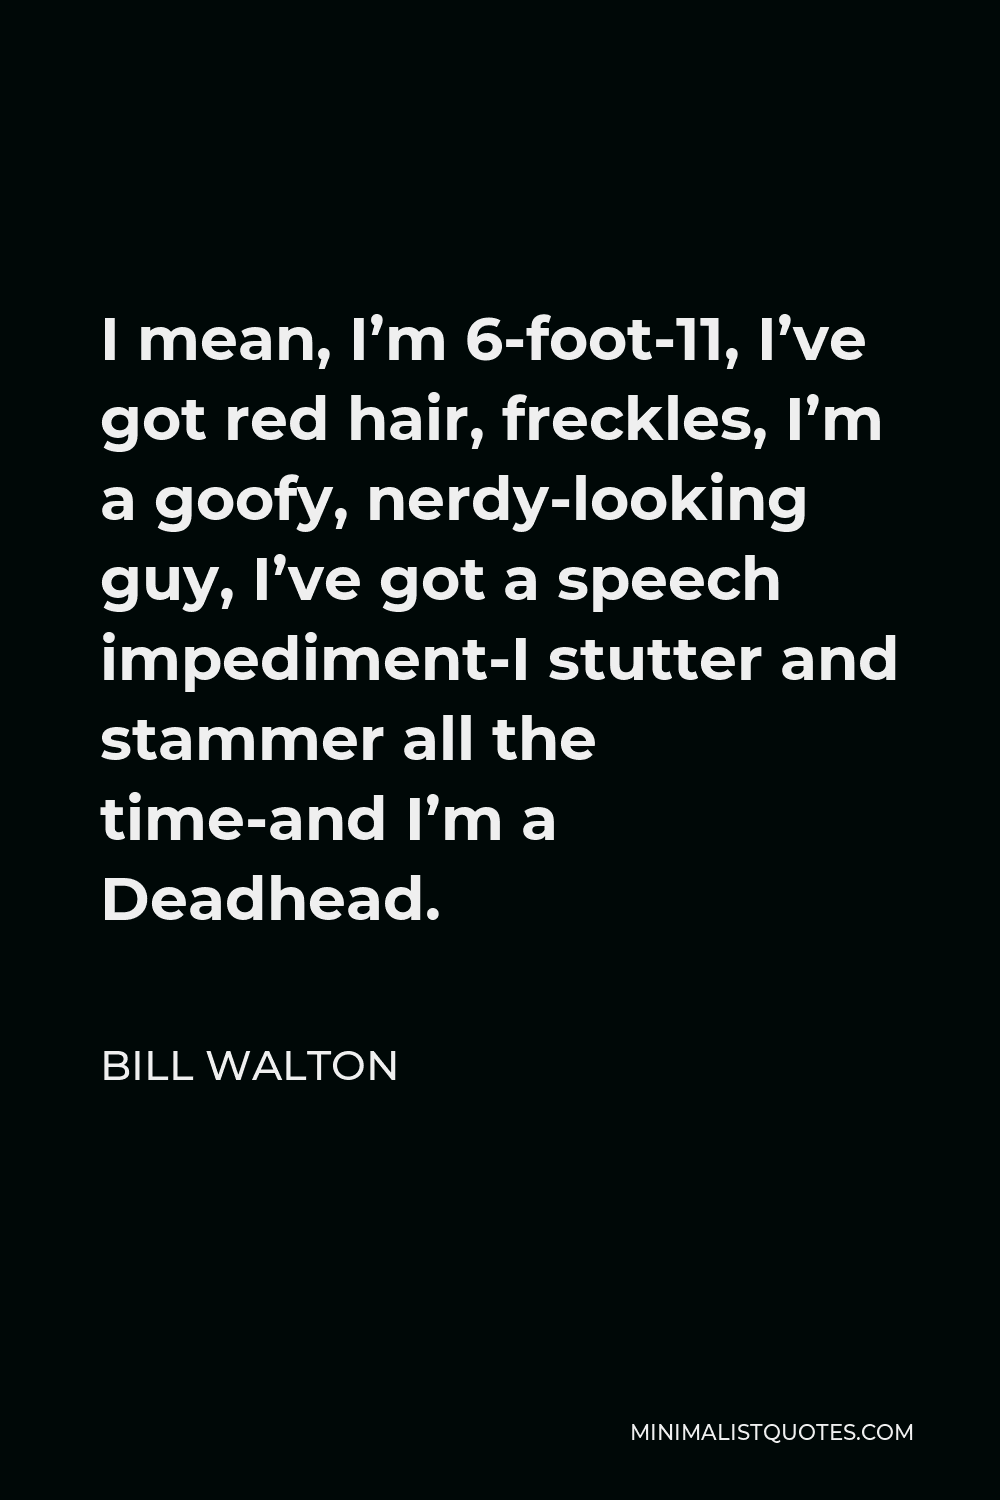 Bill Walton Quote - I mean, I’m 6-foot-11, I’ve got red hair, freckles, I’m a goofy, nerdy-looking guy, I’ve got a speech impediment-I stutter and stammer all the time-and I’m a Deadhead.